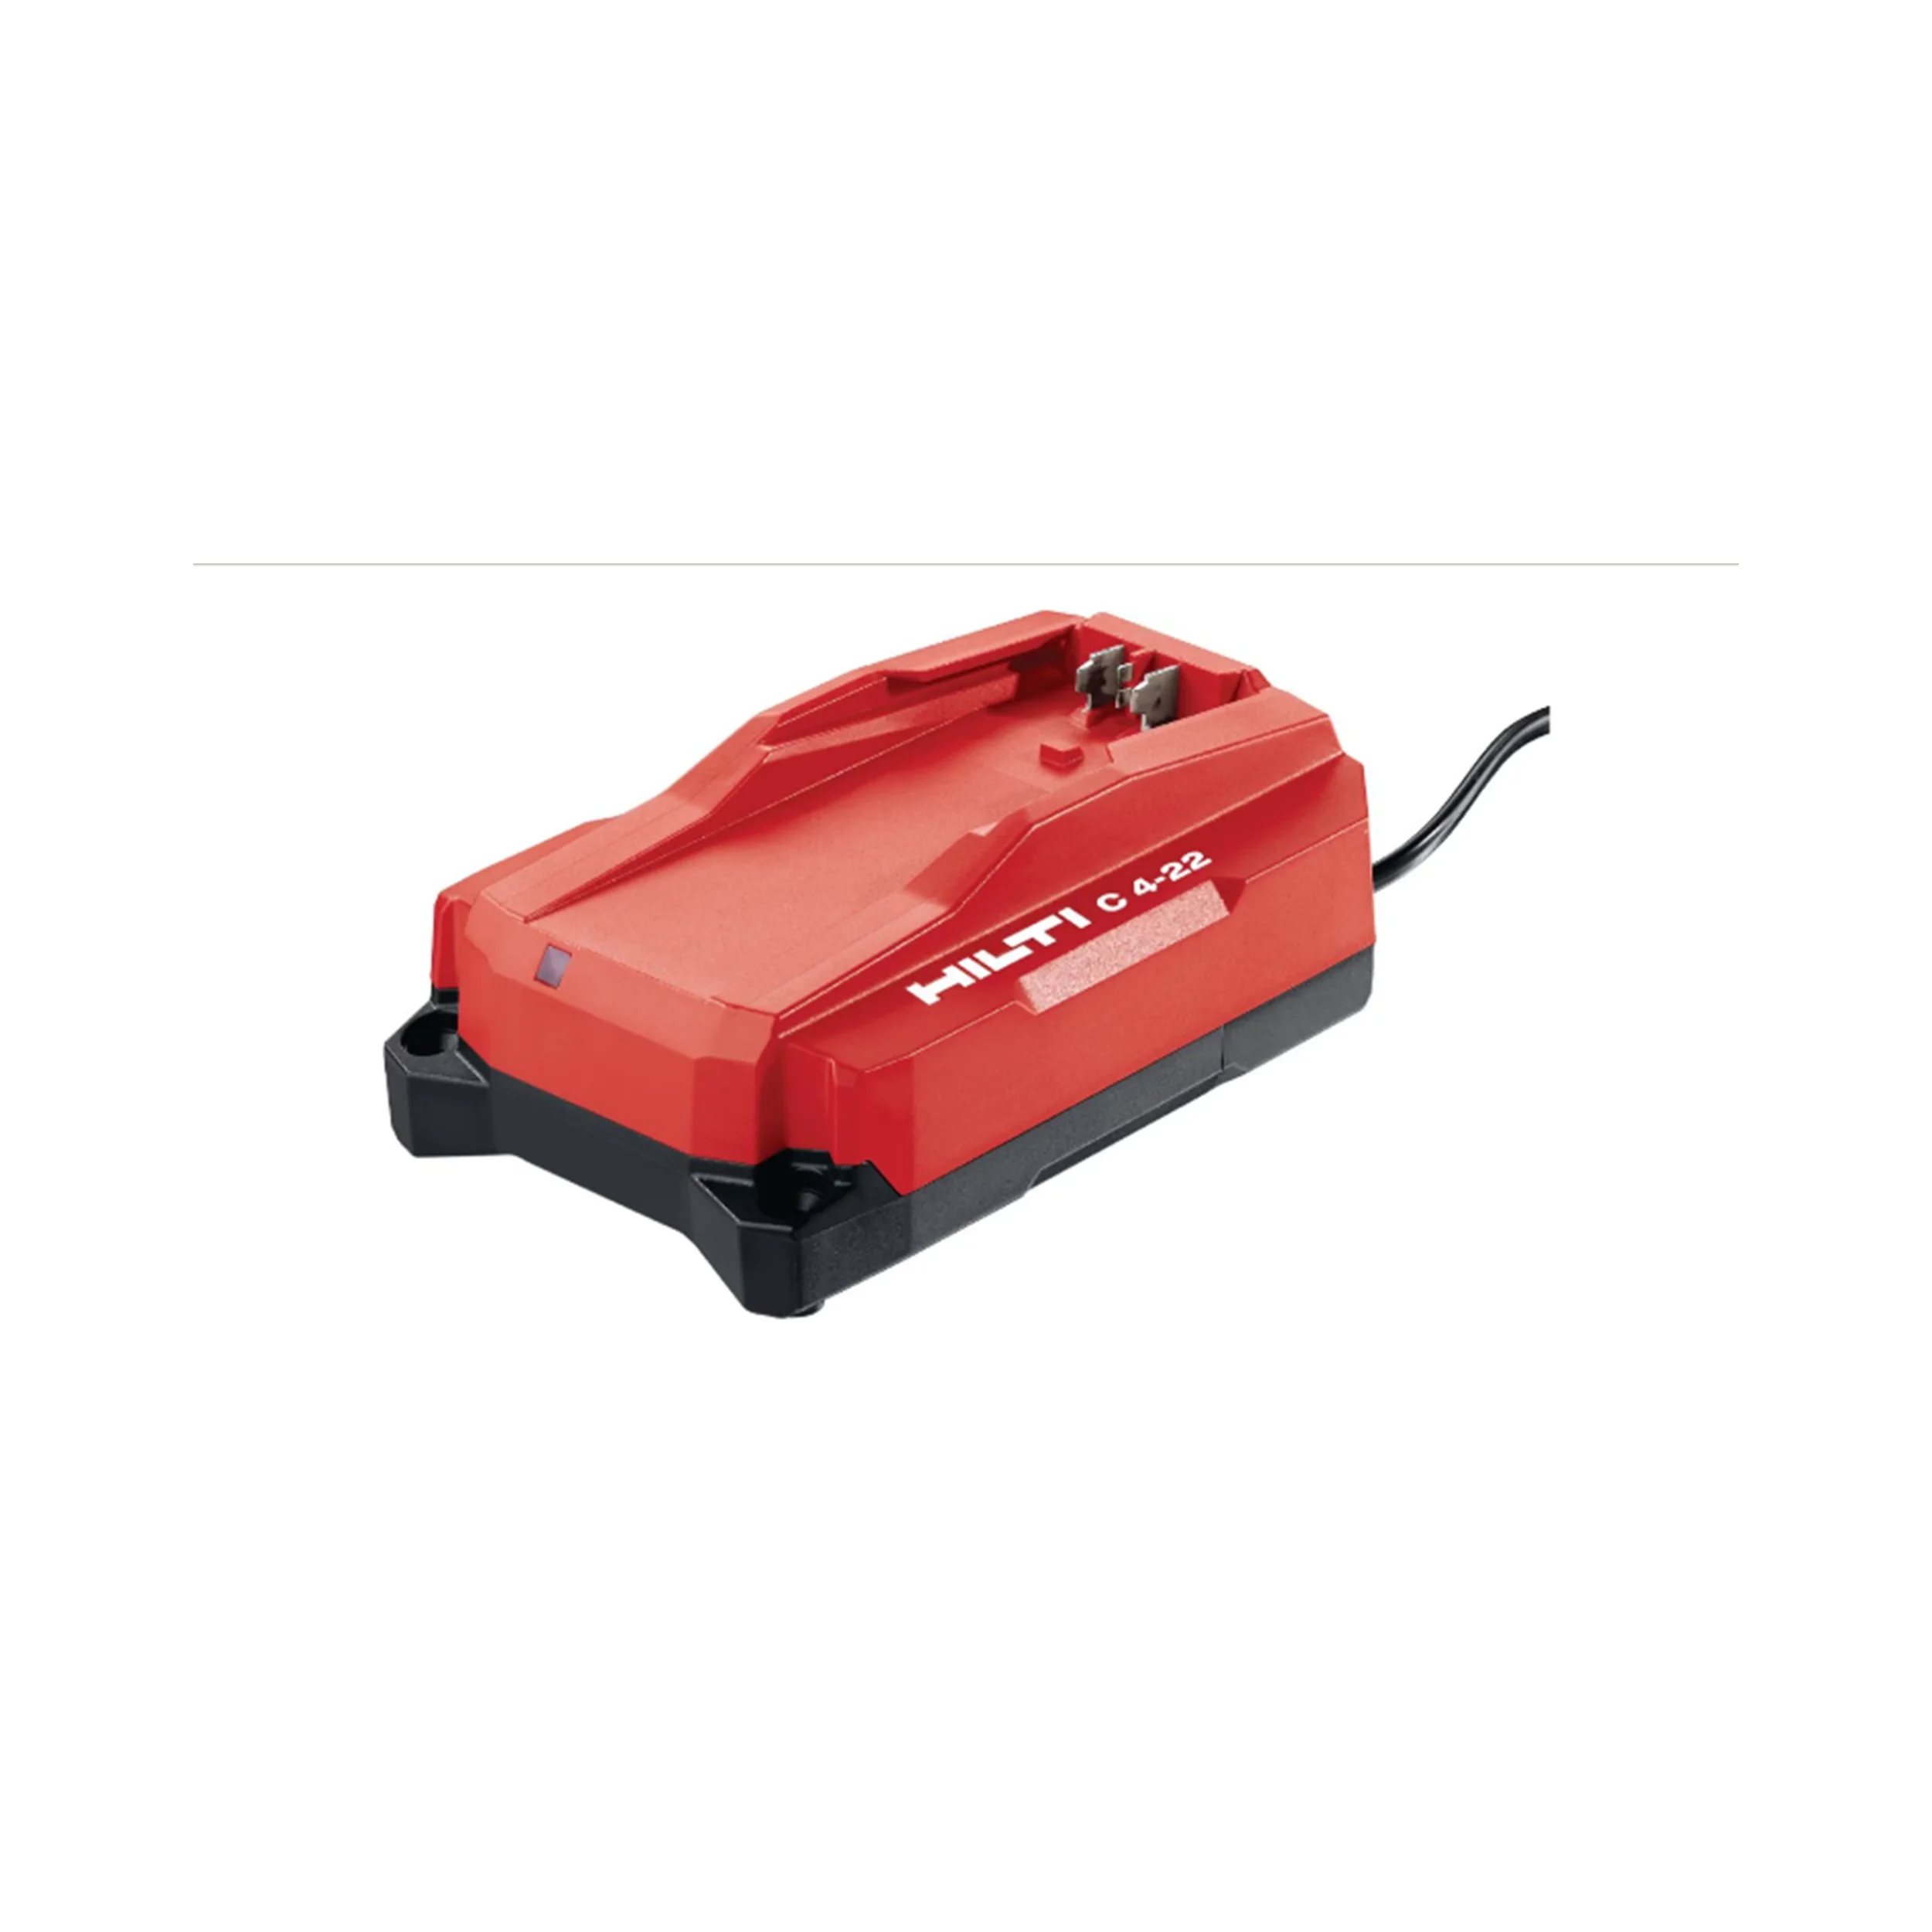 HILTI NURON series lithium battery, electric hammer, electric drill battery charger, 22V tool